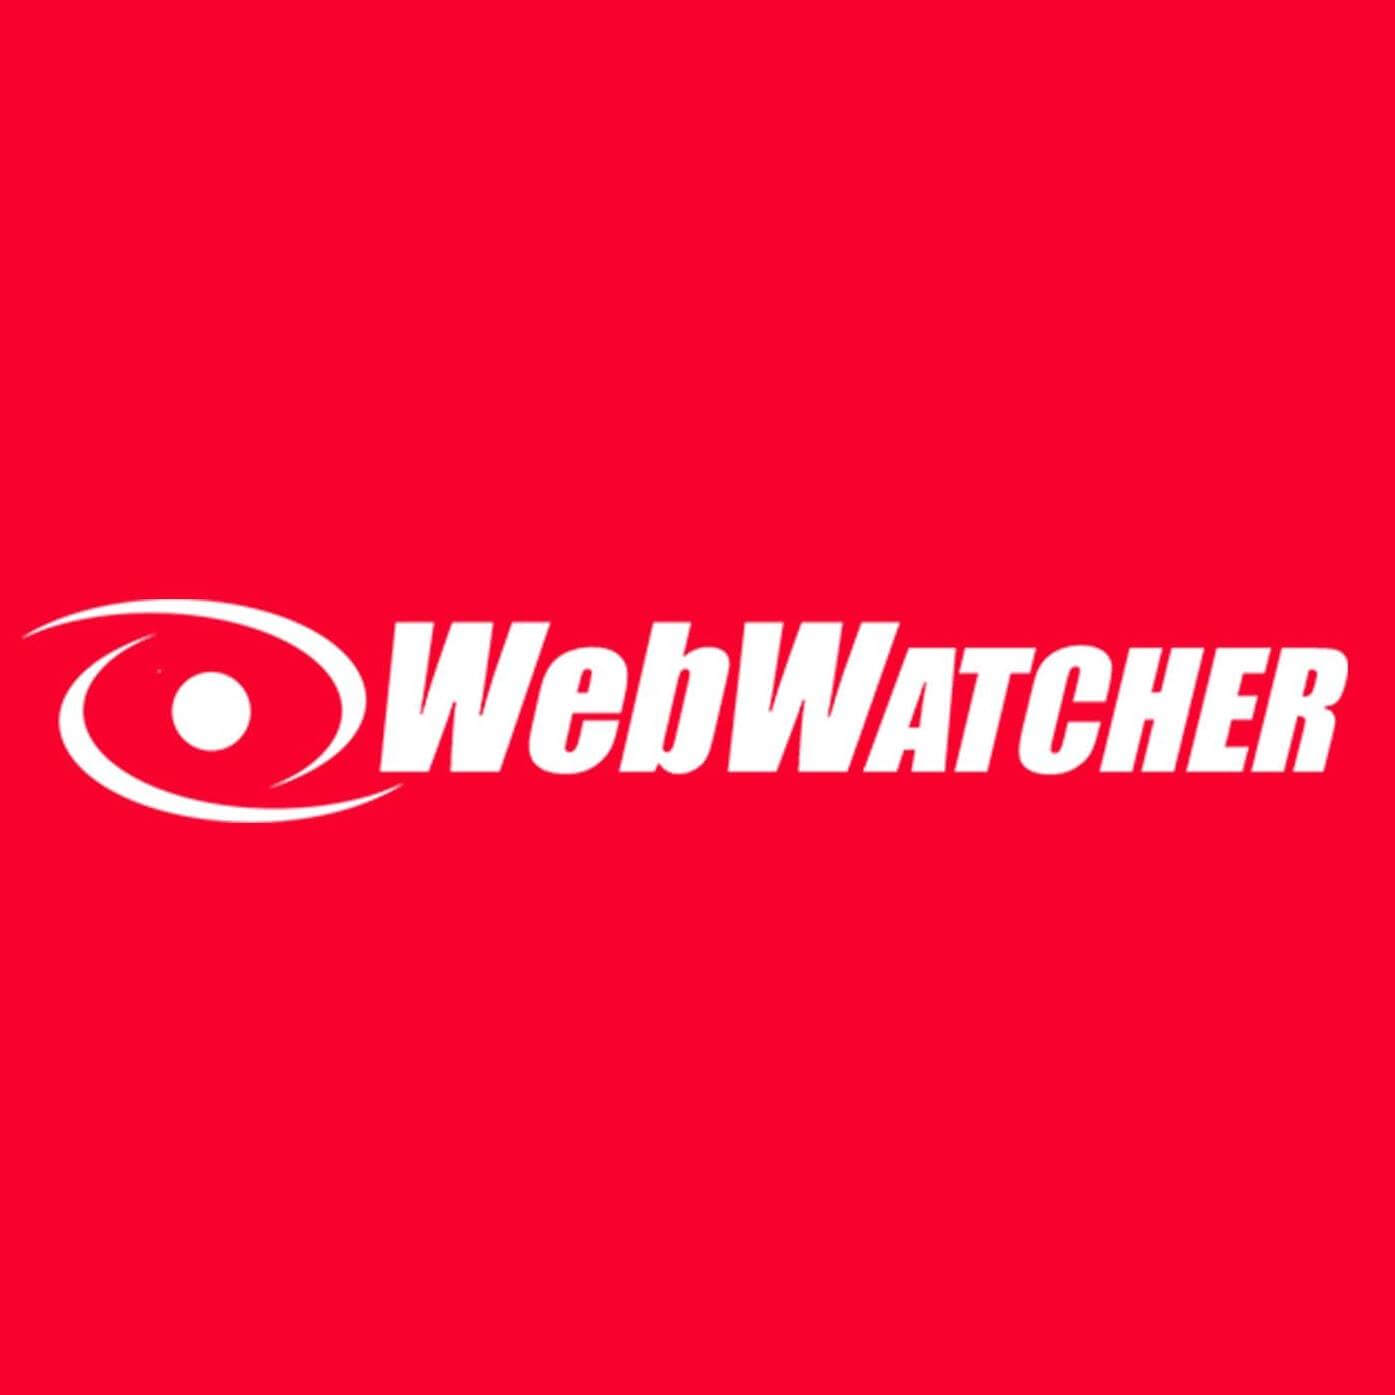 What is Webwatcher